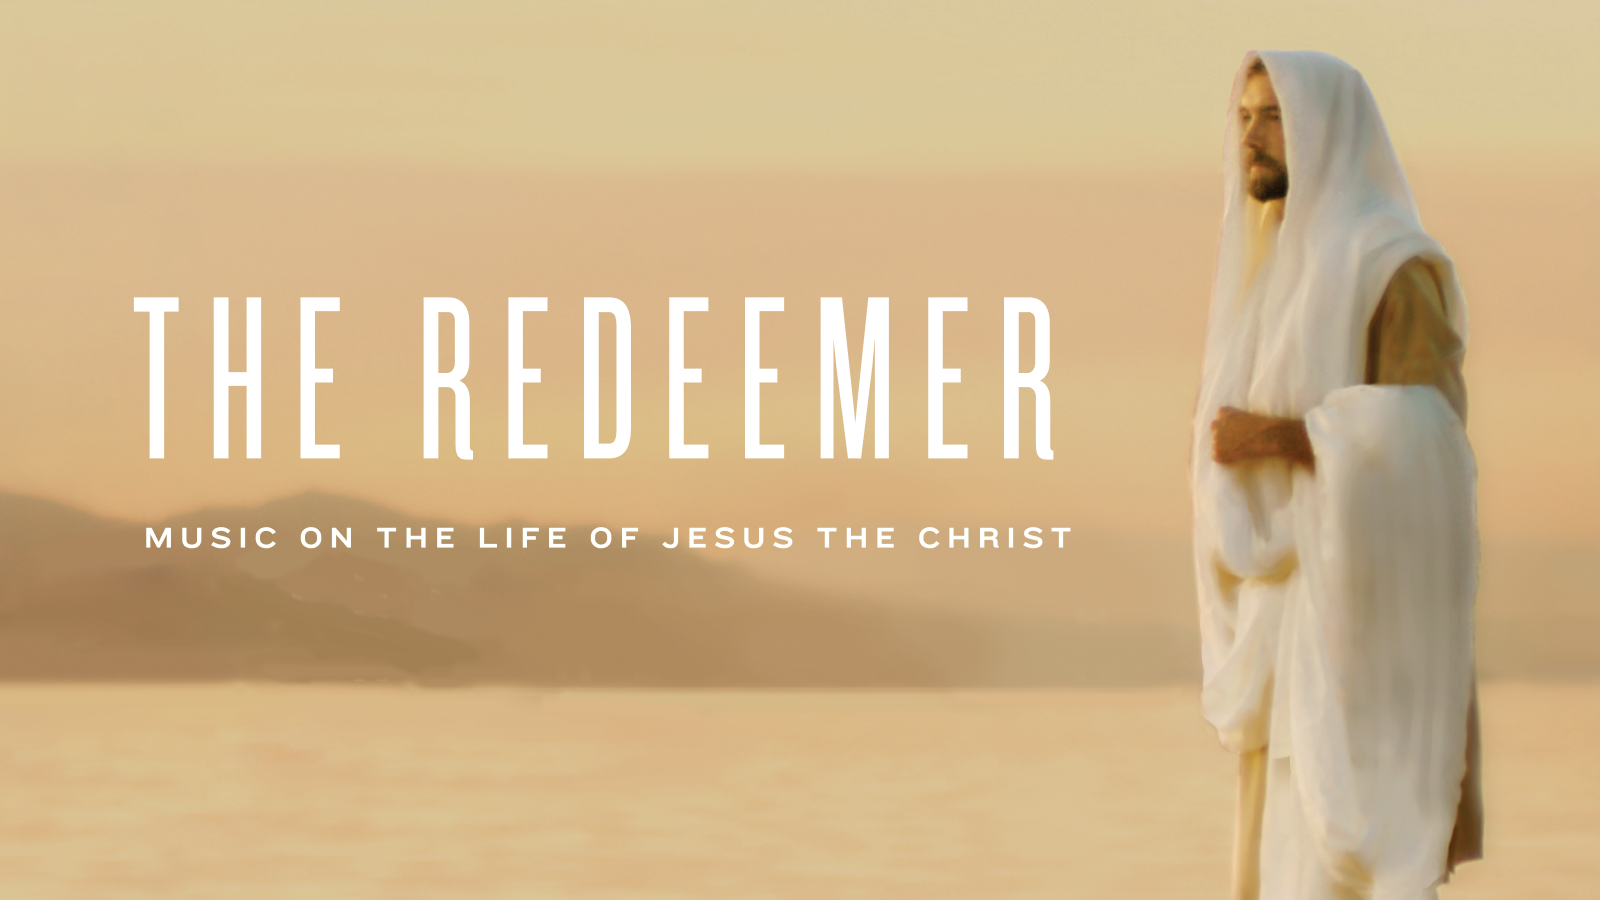 The Redeemer: Music on the Life of Jesus the Christ